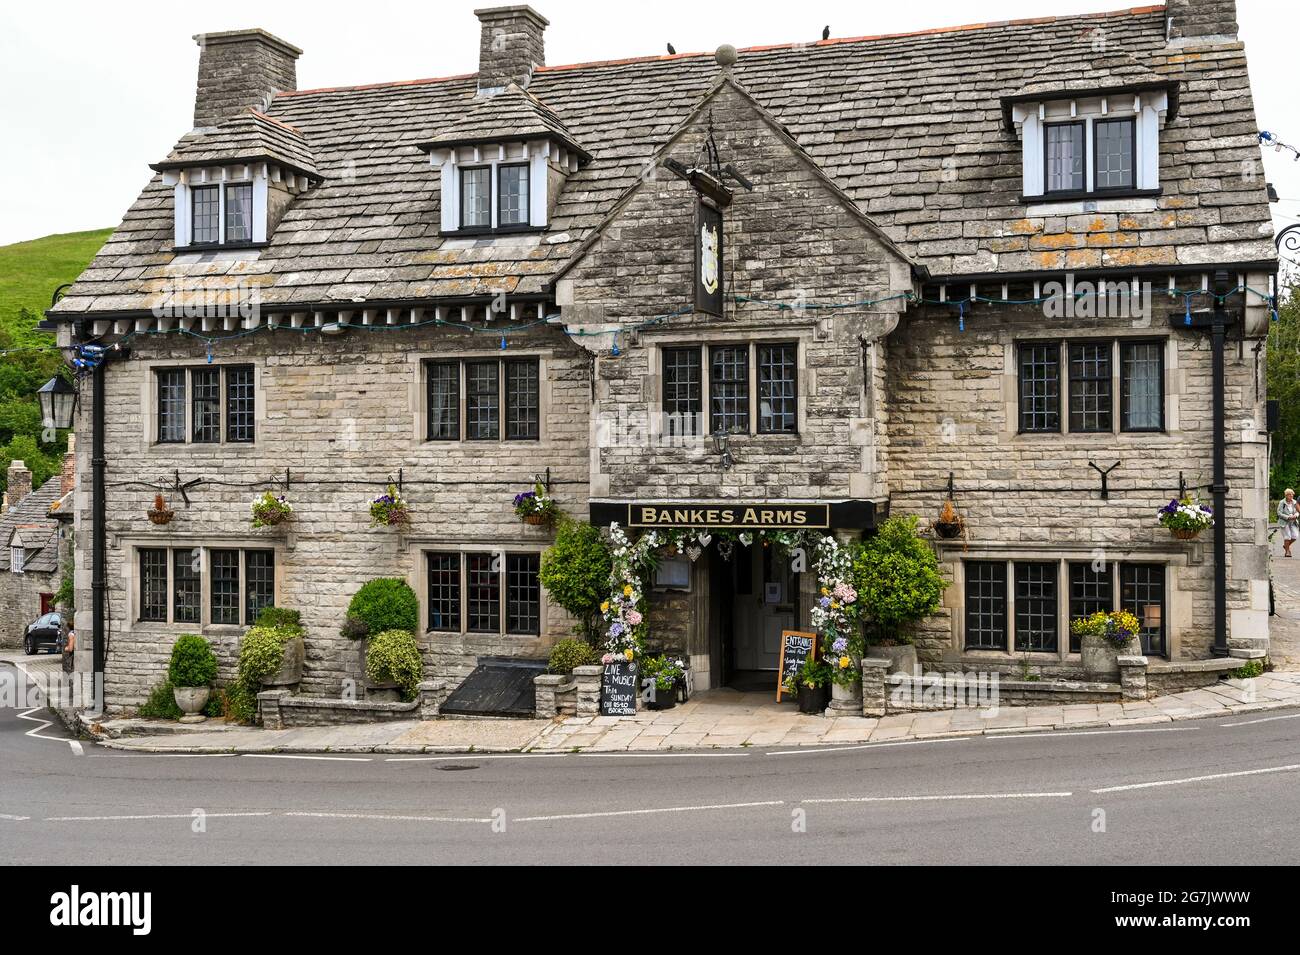 Corfe Castle, Dorset, England - June 2021: exterior view of the entrance to the Bankes Arms pub in the village. Stock Photo